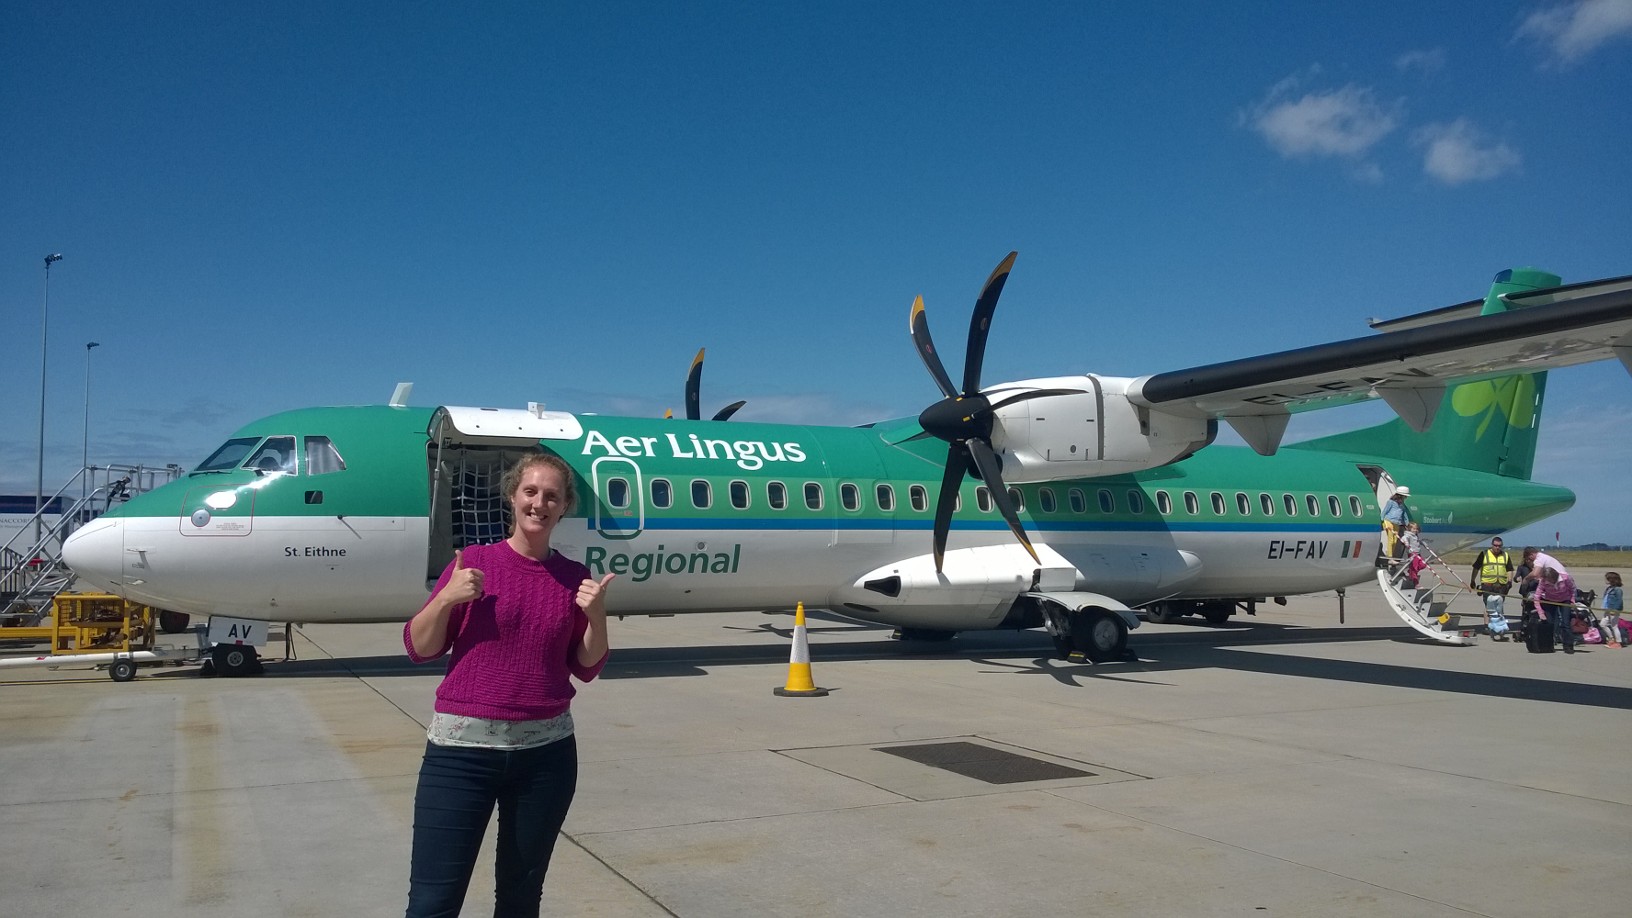 flights from dublin to jersey aer lingus